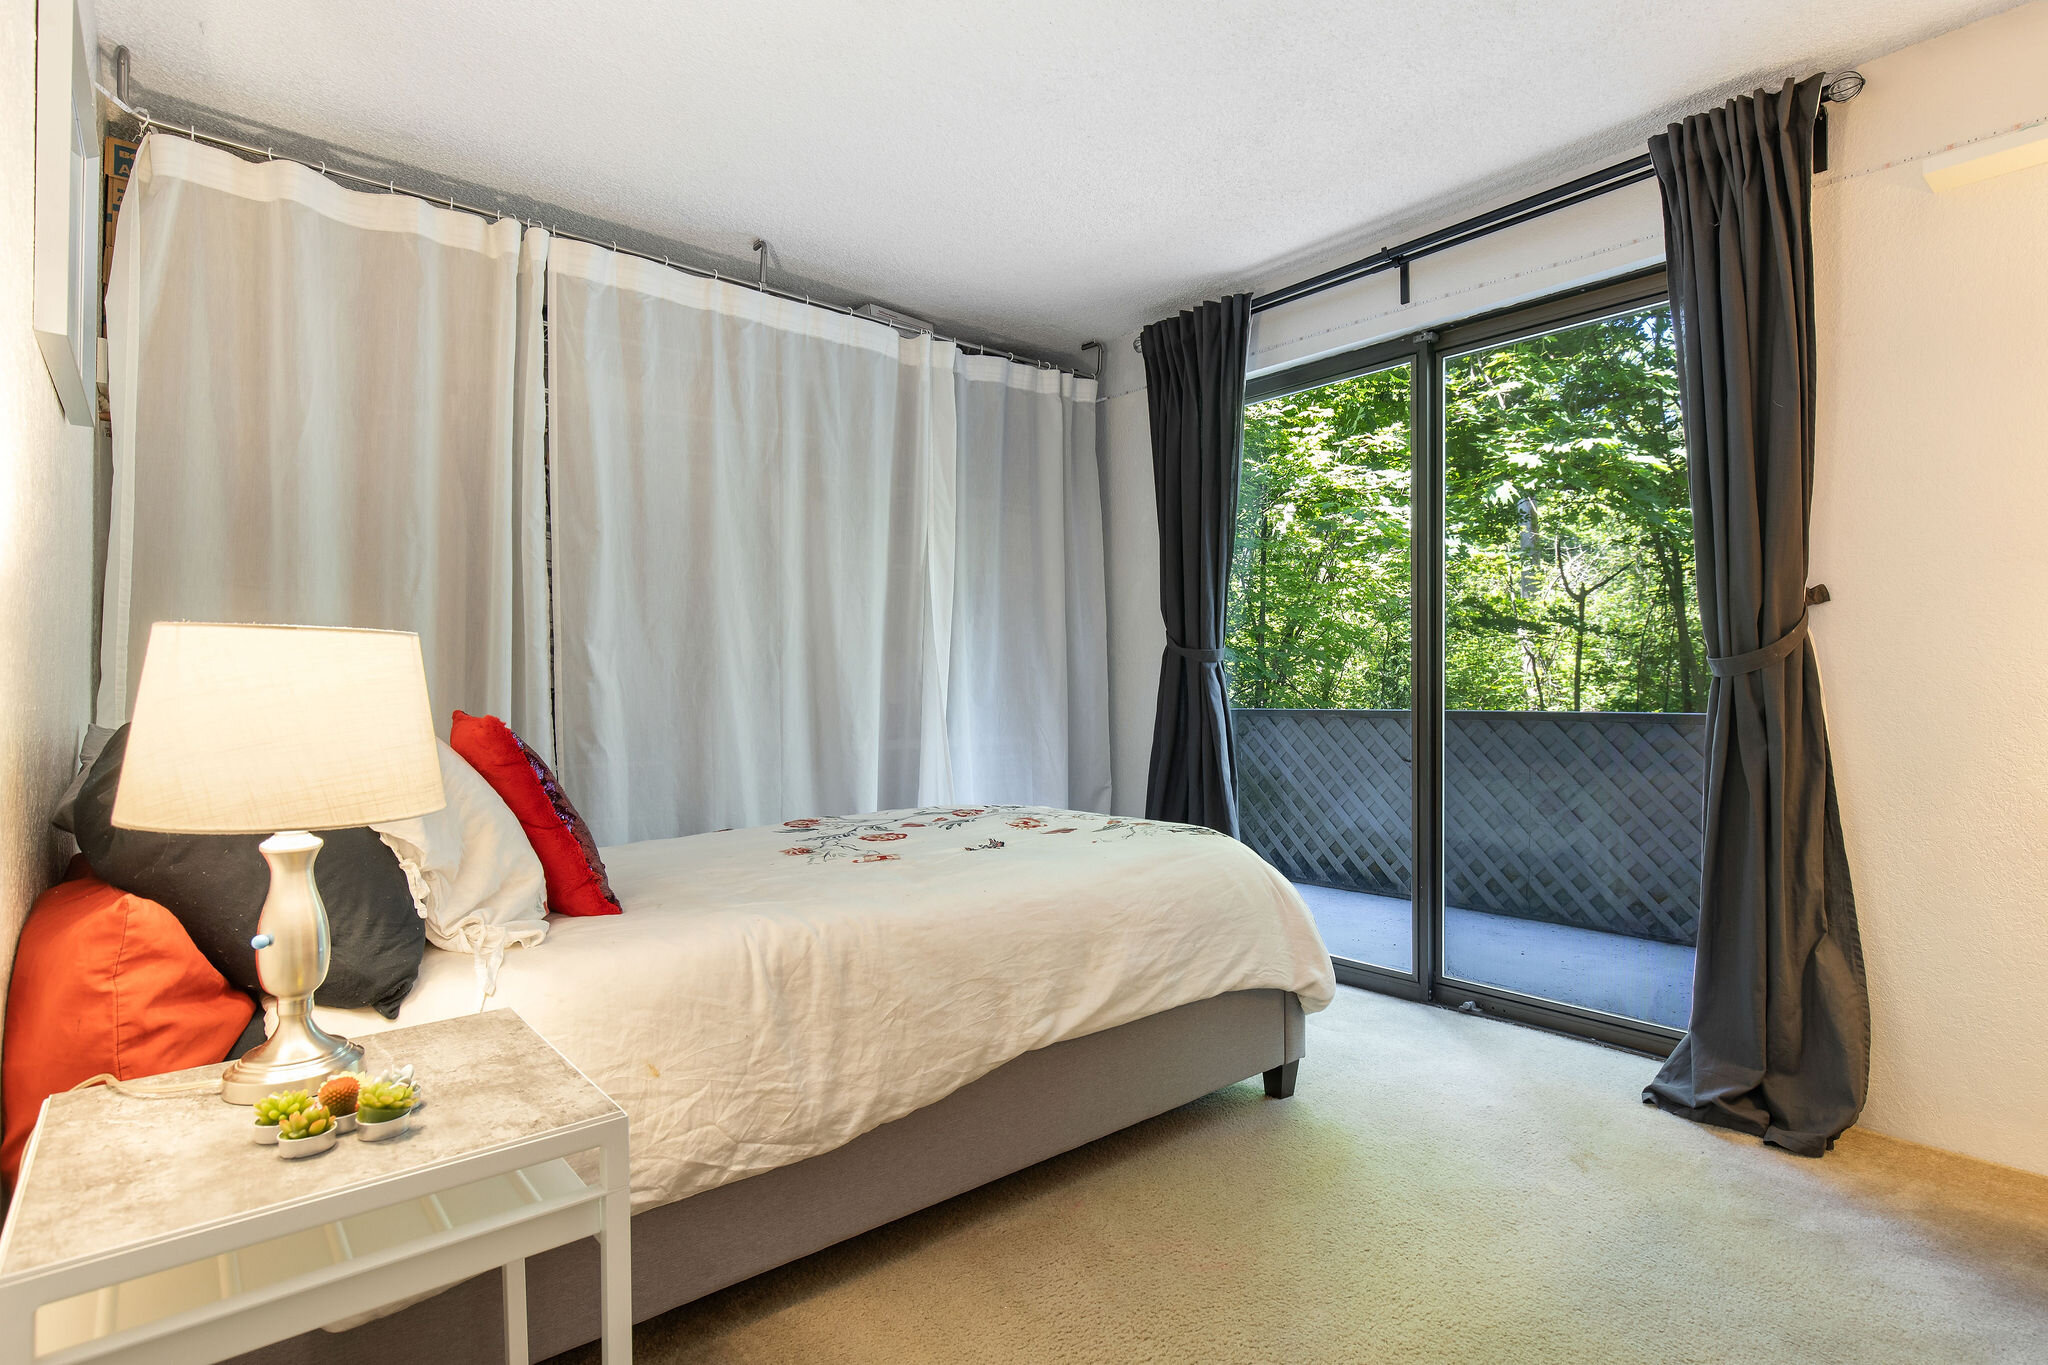  image description: interior of bedroom with twin bed, closet and sliding glass door 